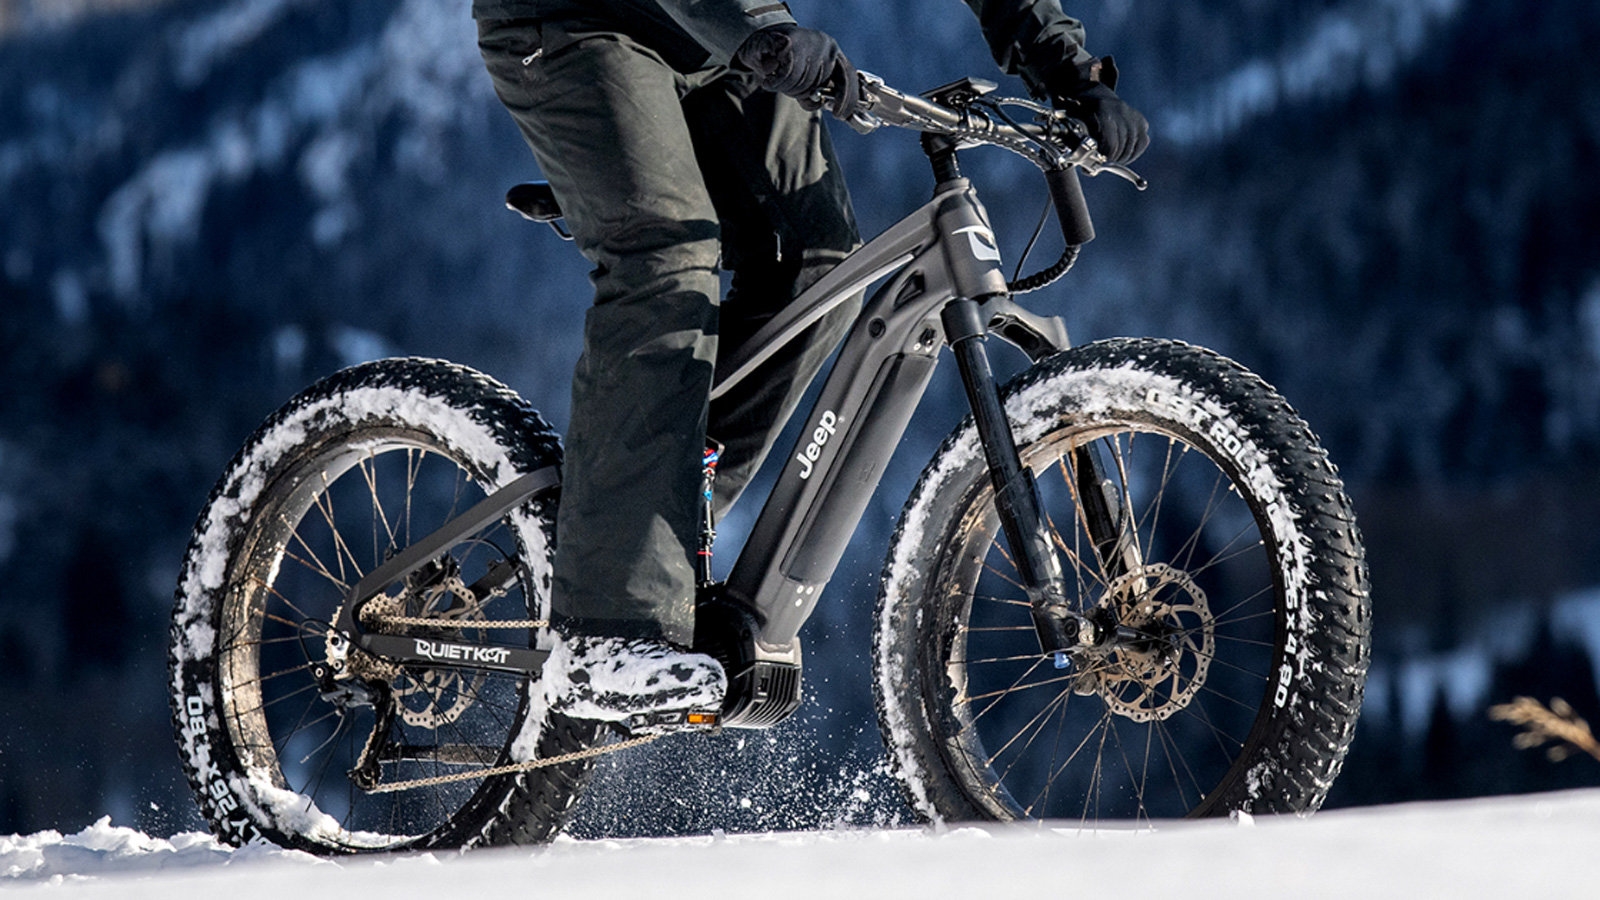 Jeep's all-terrain e-bike is available to pre-order for $5,899 | DeviceDaily.com